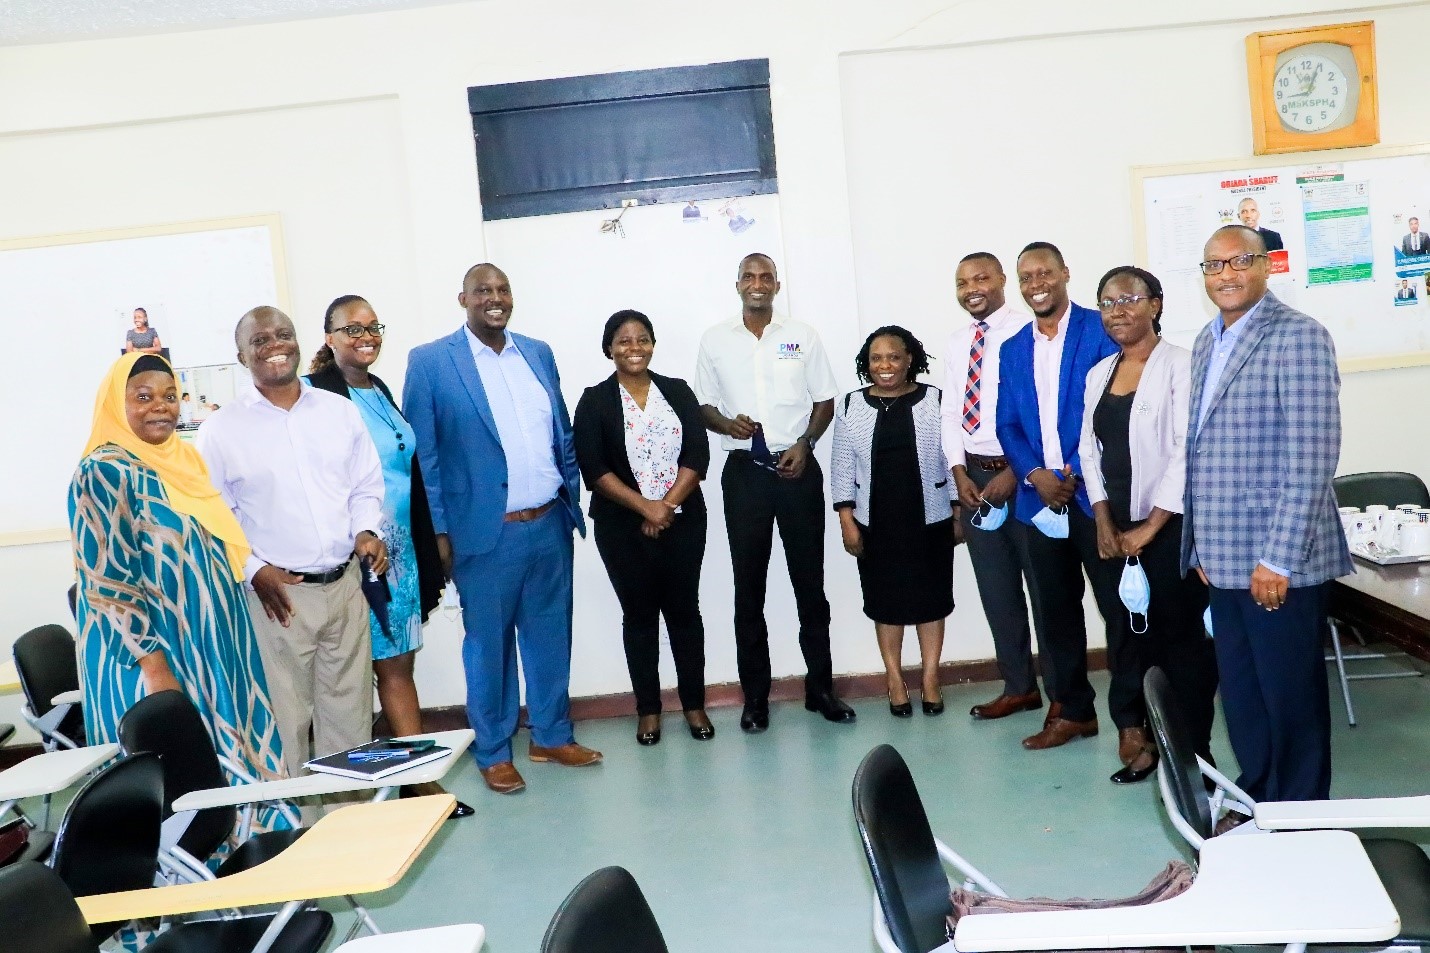 Members and Heads of Units at MakSPH in a group photo with a team from Jhpiego after sharing results of the 2nd OCA in February 2021. Photo by Davidson Ndyabahika